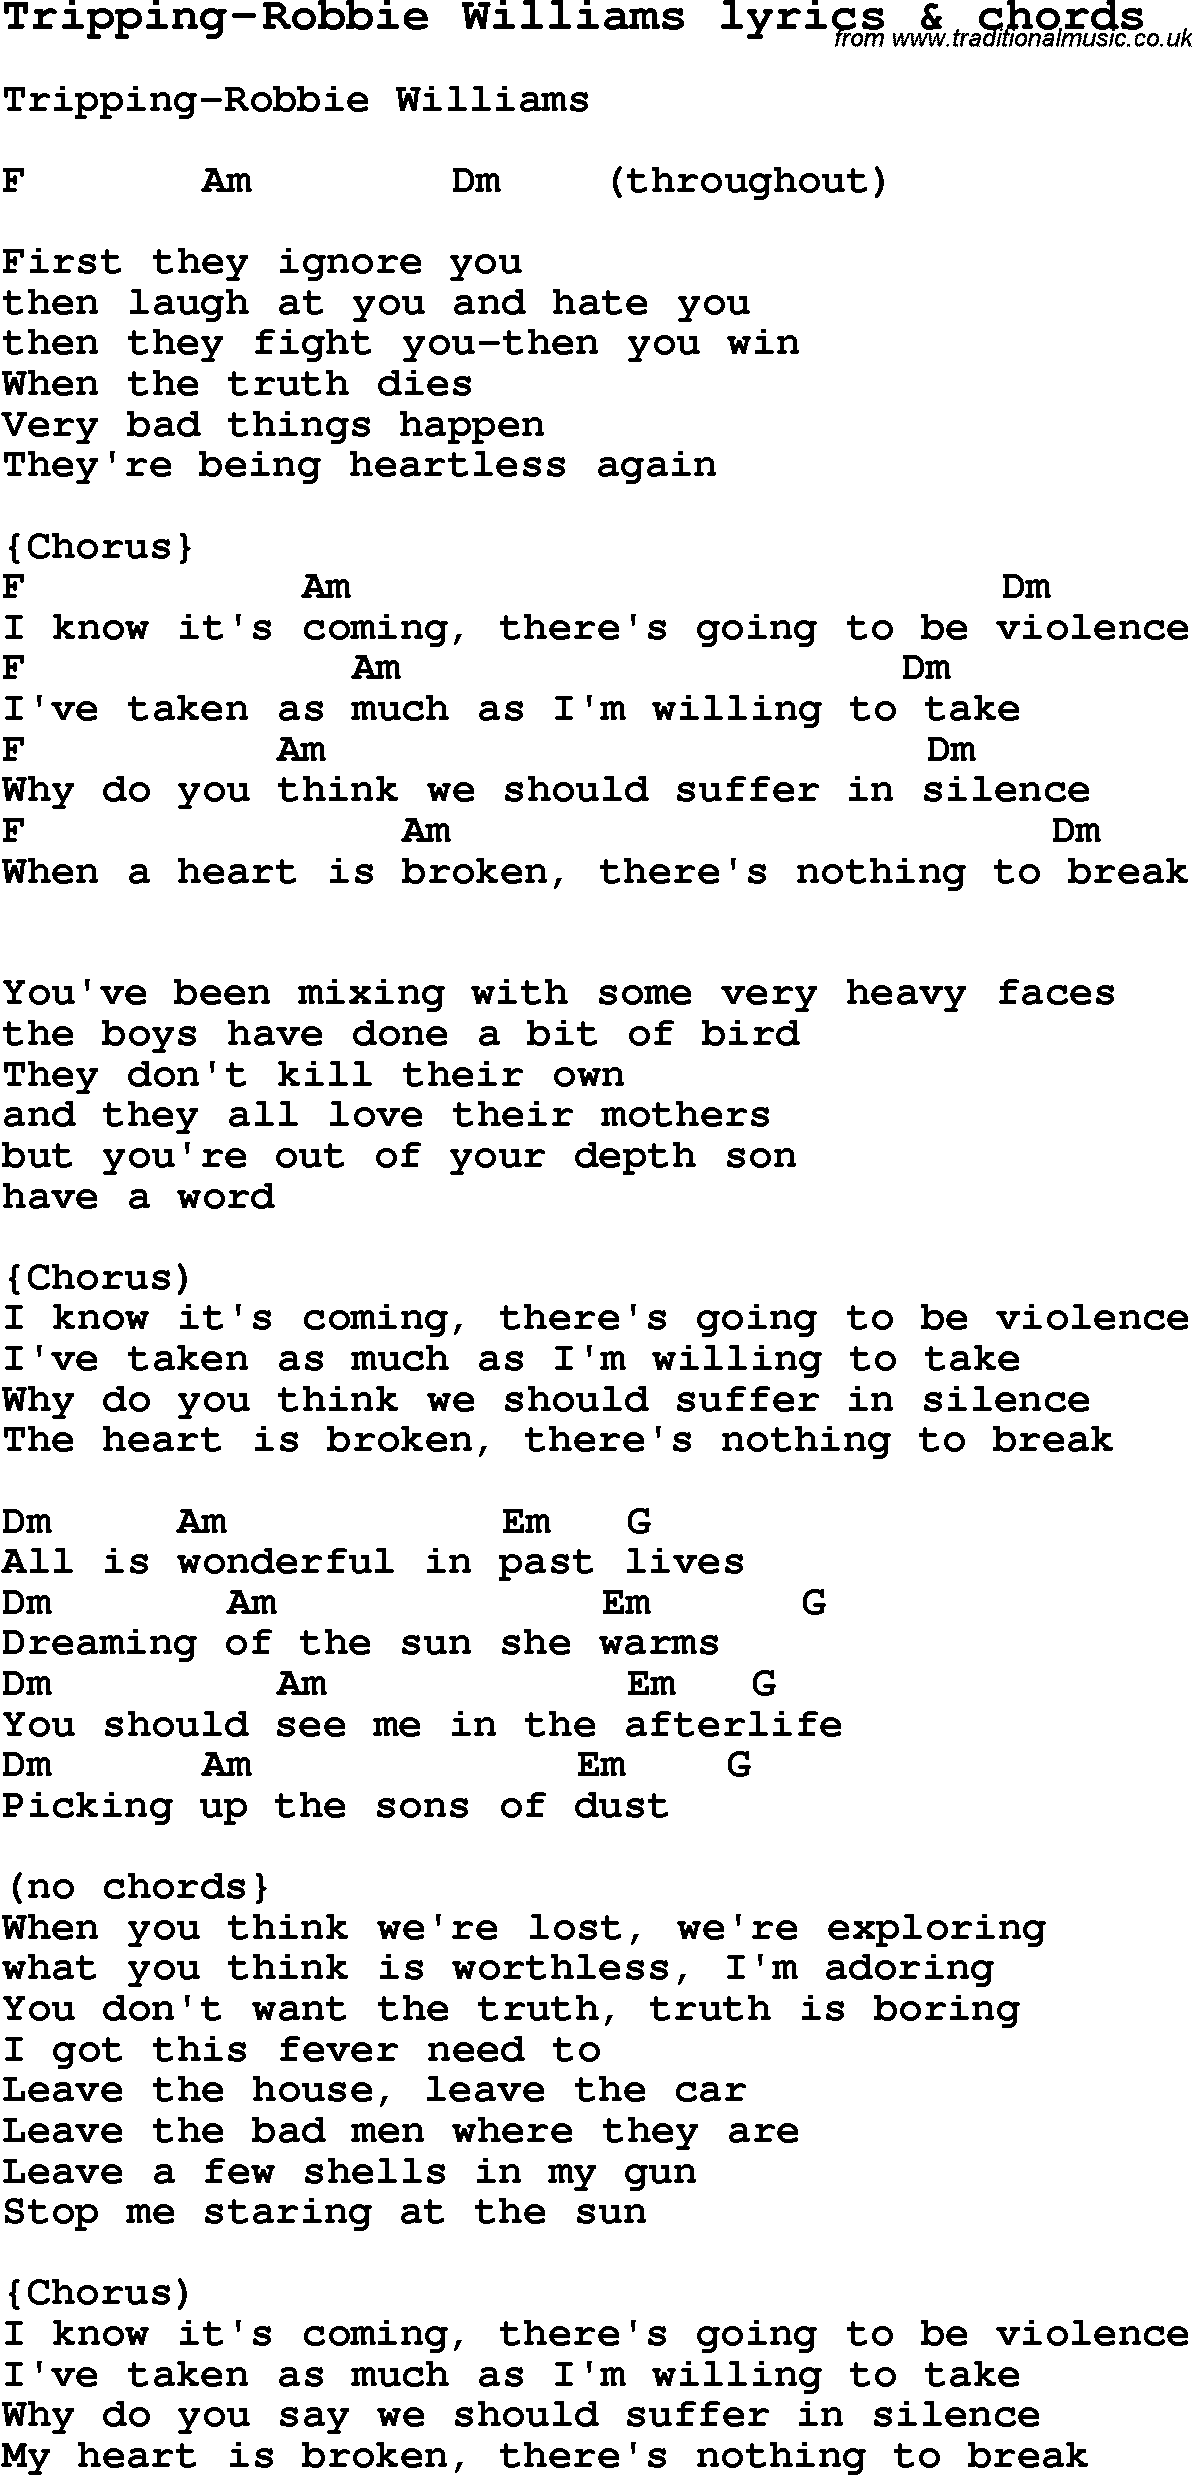 Love Song Lyrics for: Tripping-Robbie Williams with chords for Ukulele, Guitar Banjo etc.